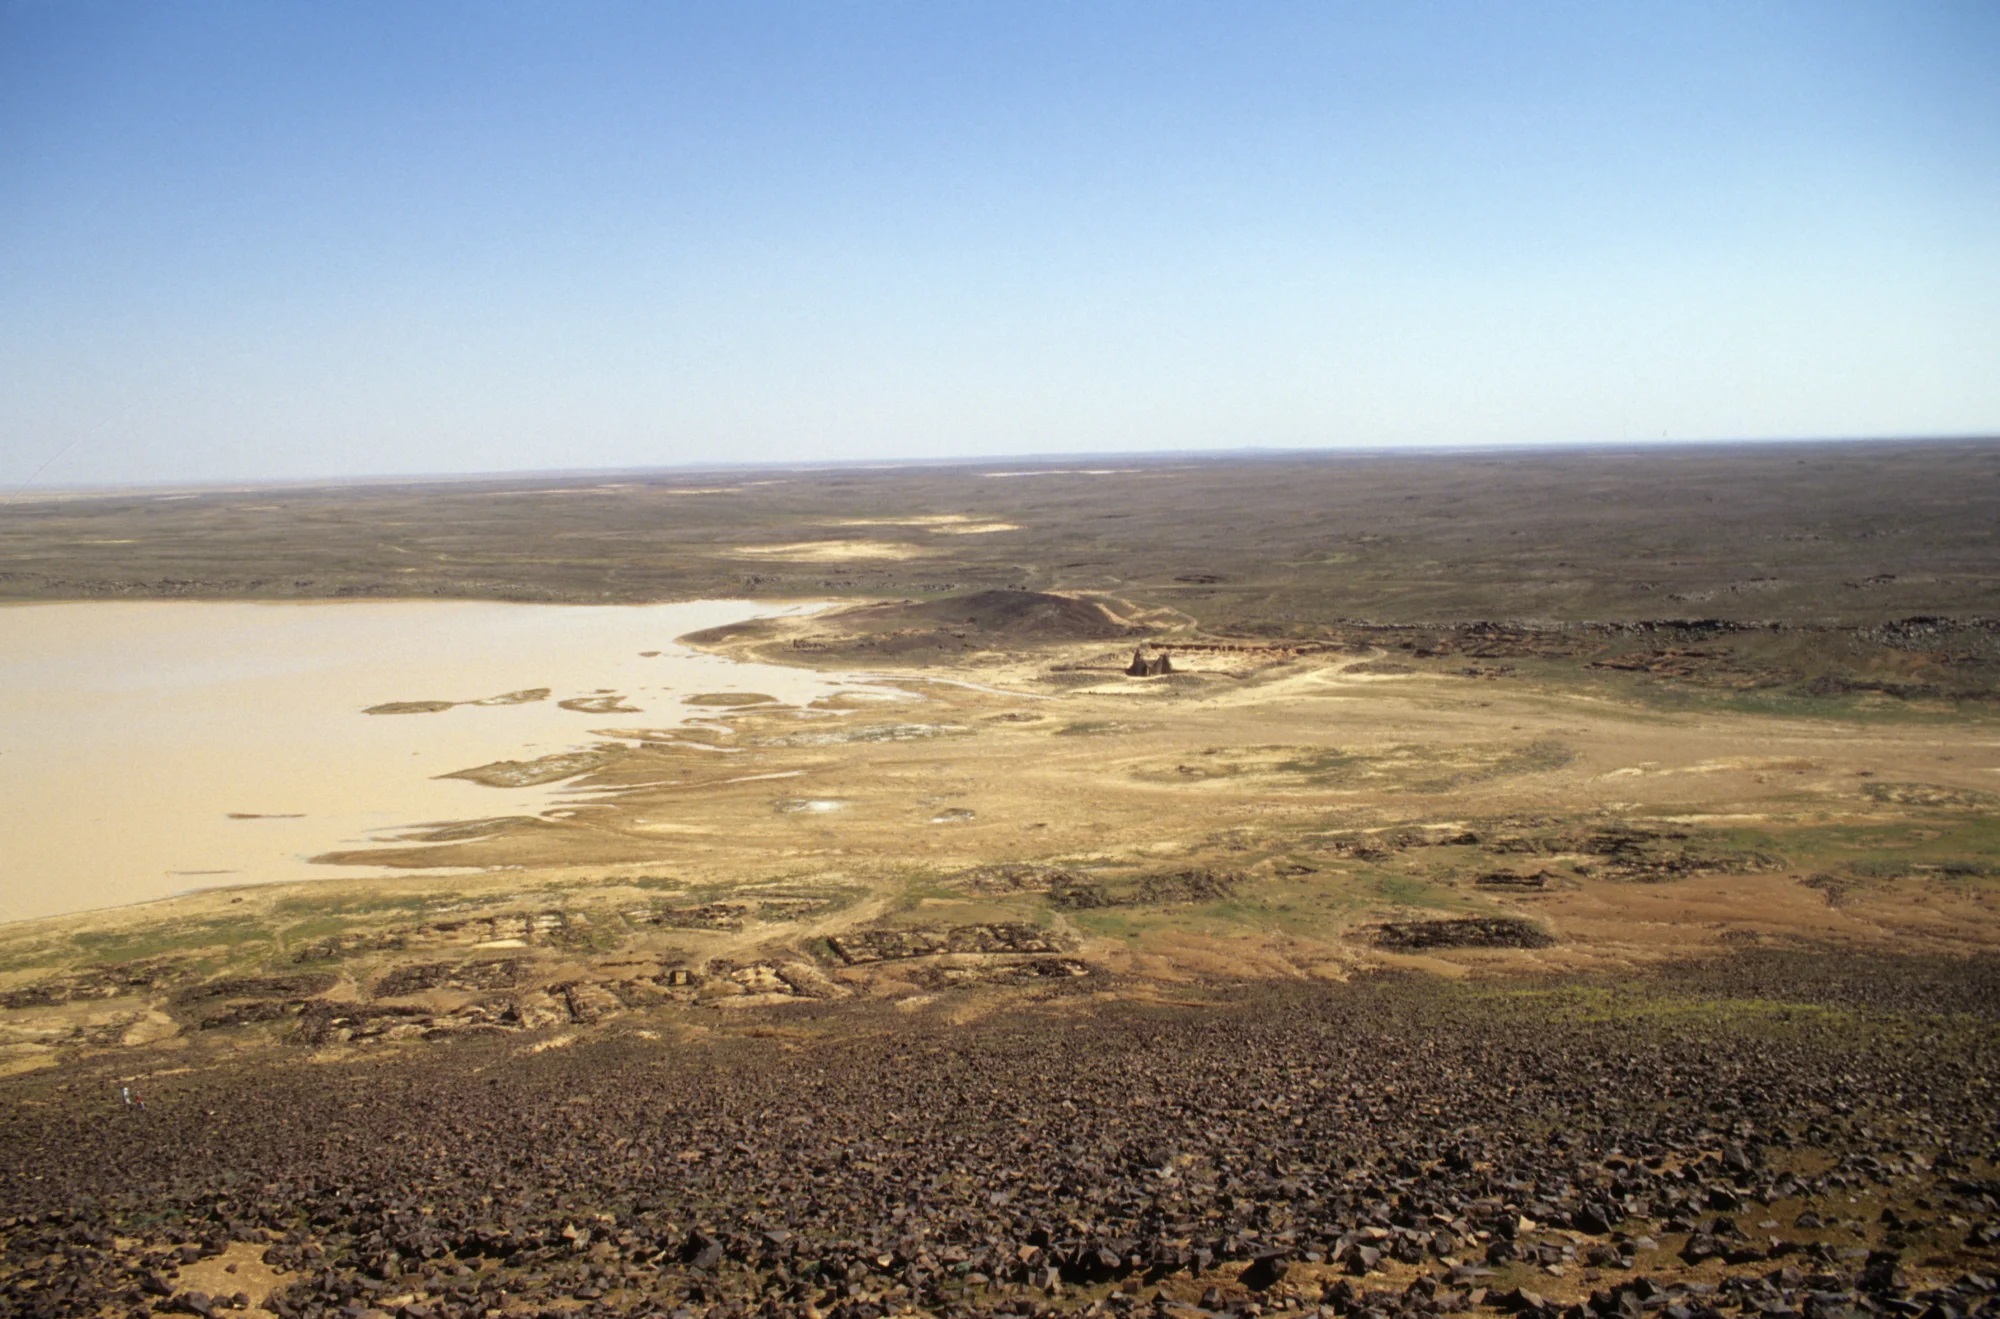 View from the volcano rim. Walid’s Qasr can be seen in the distance across the delta. 